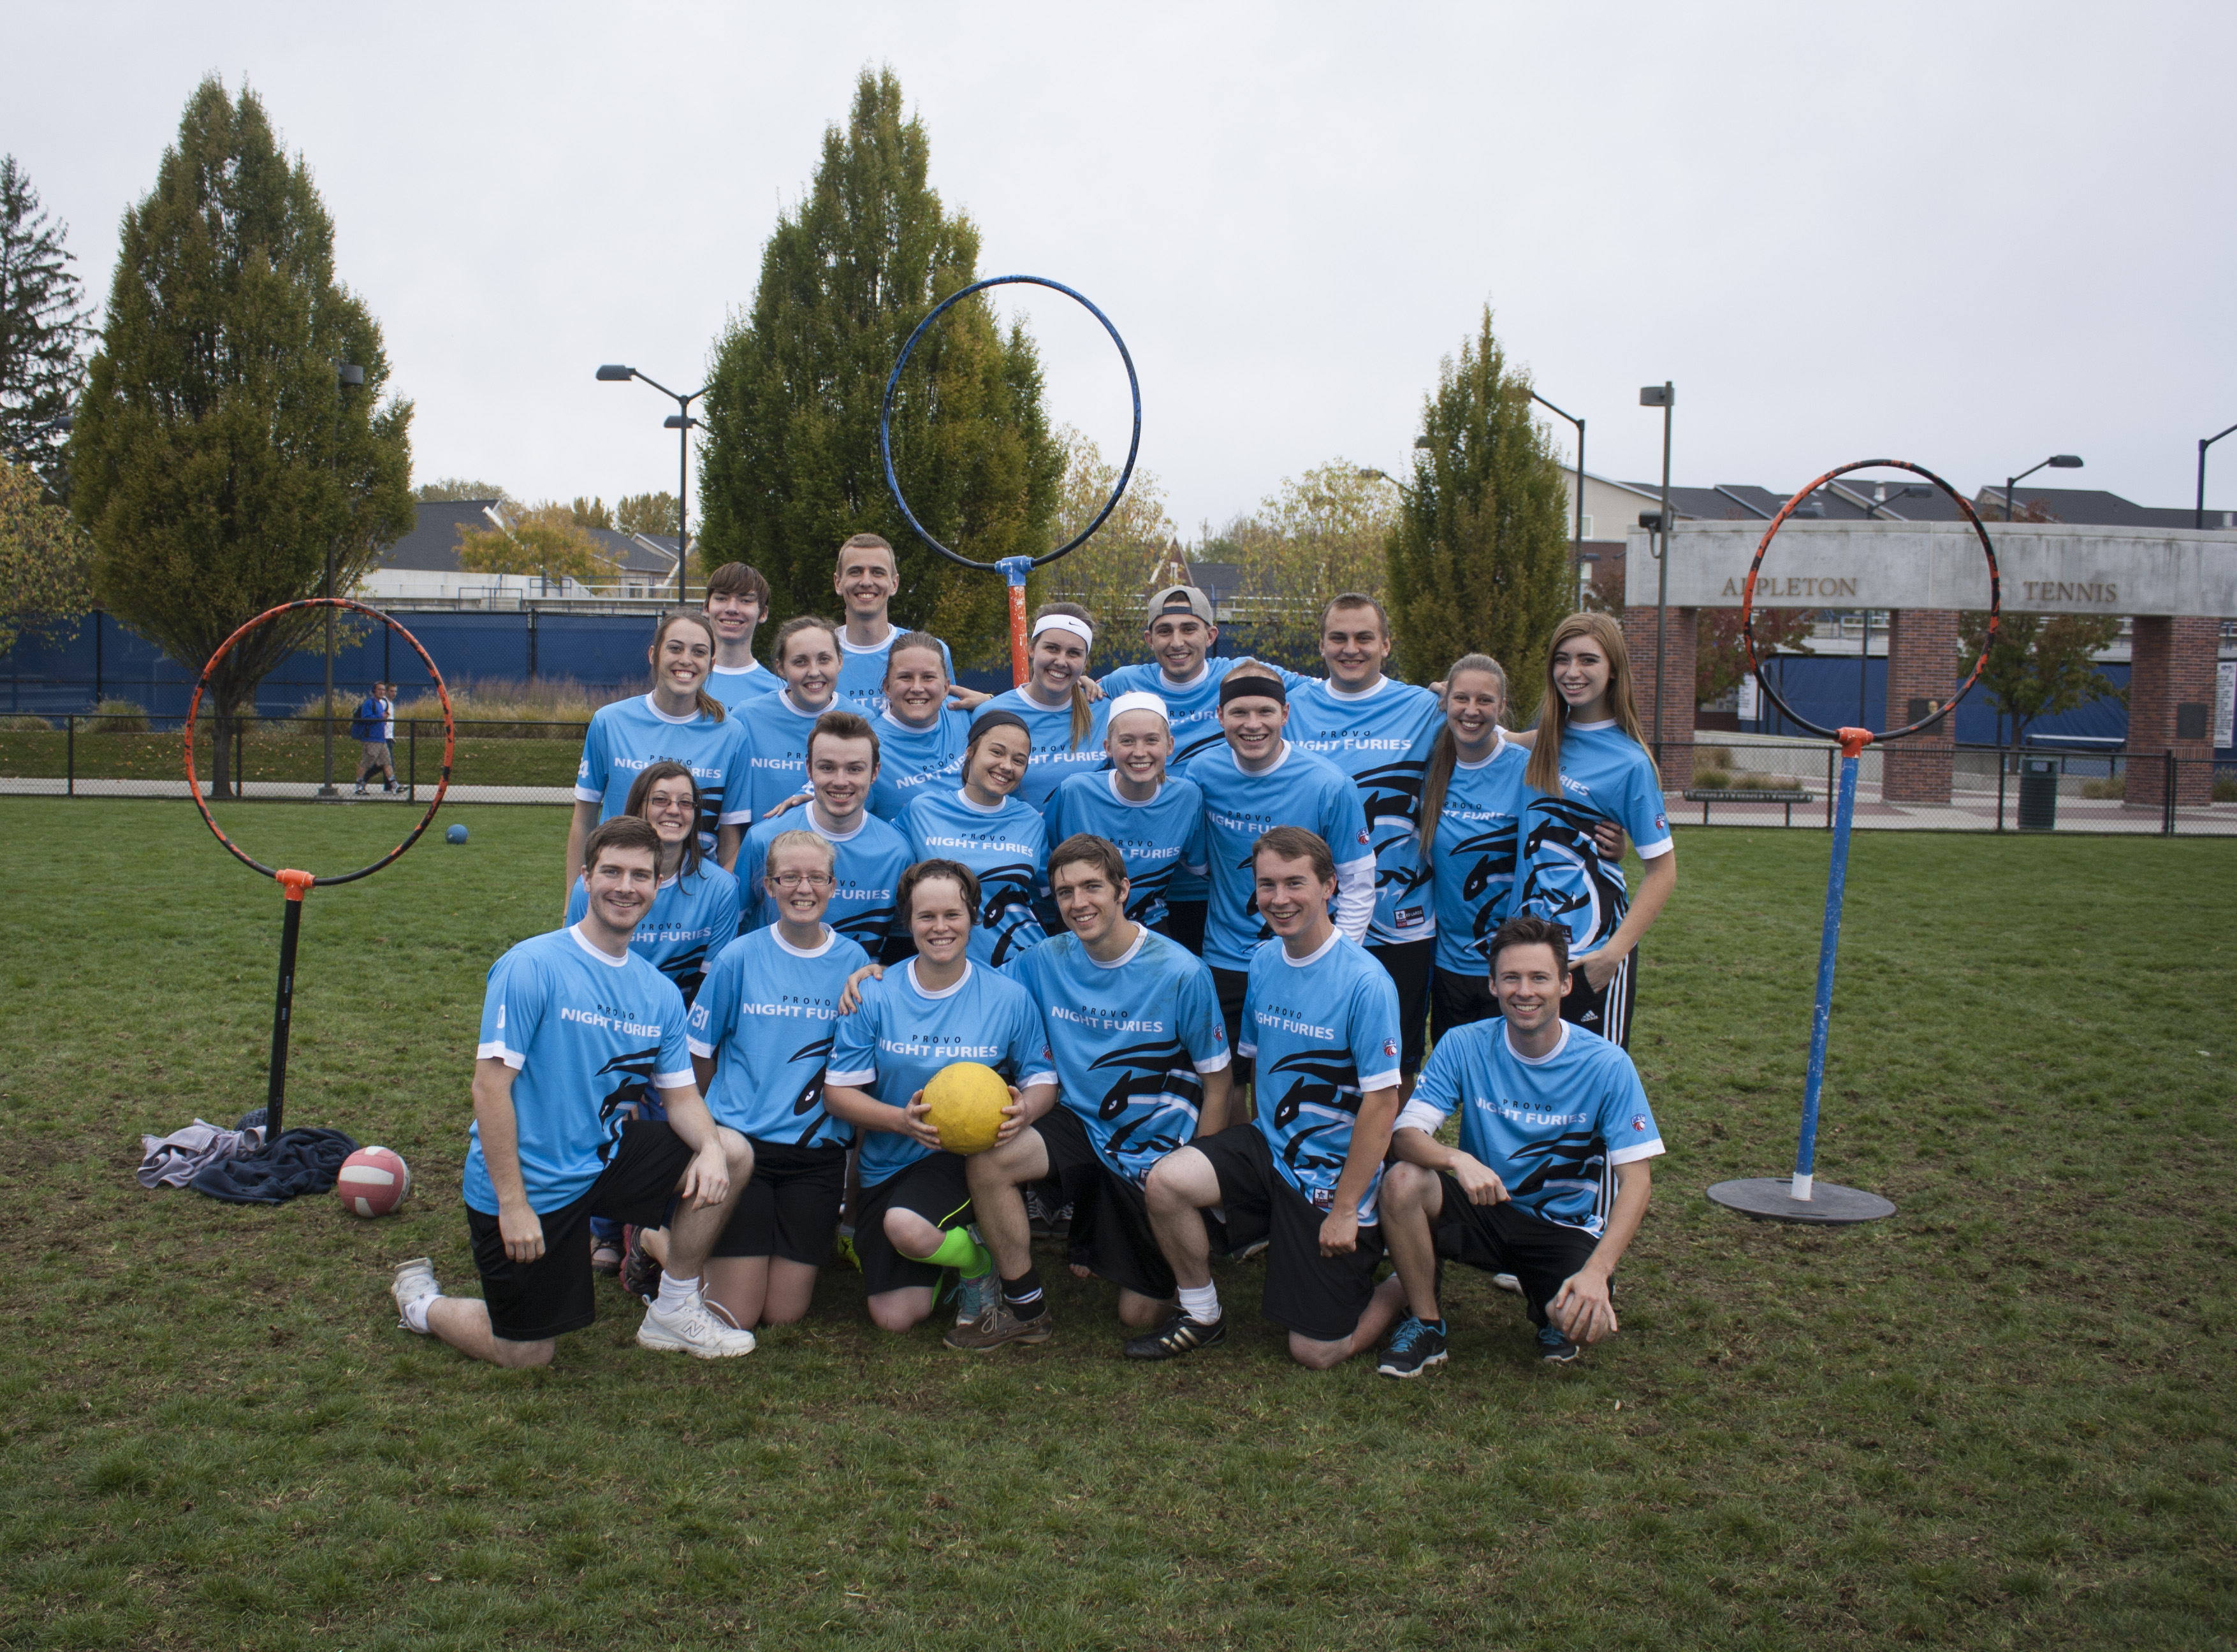 Wizarding world comes to life with Provo quidditch team The Daily